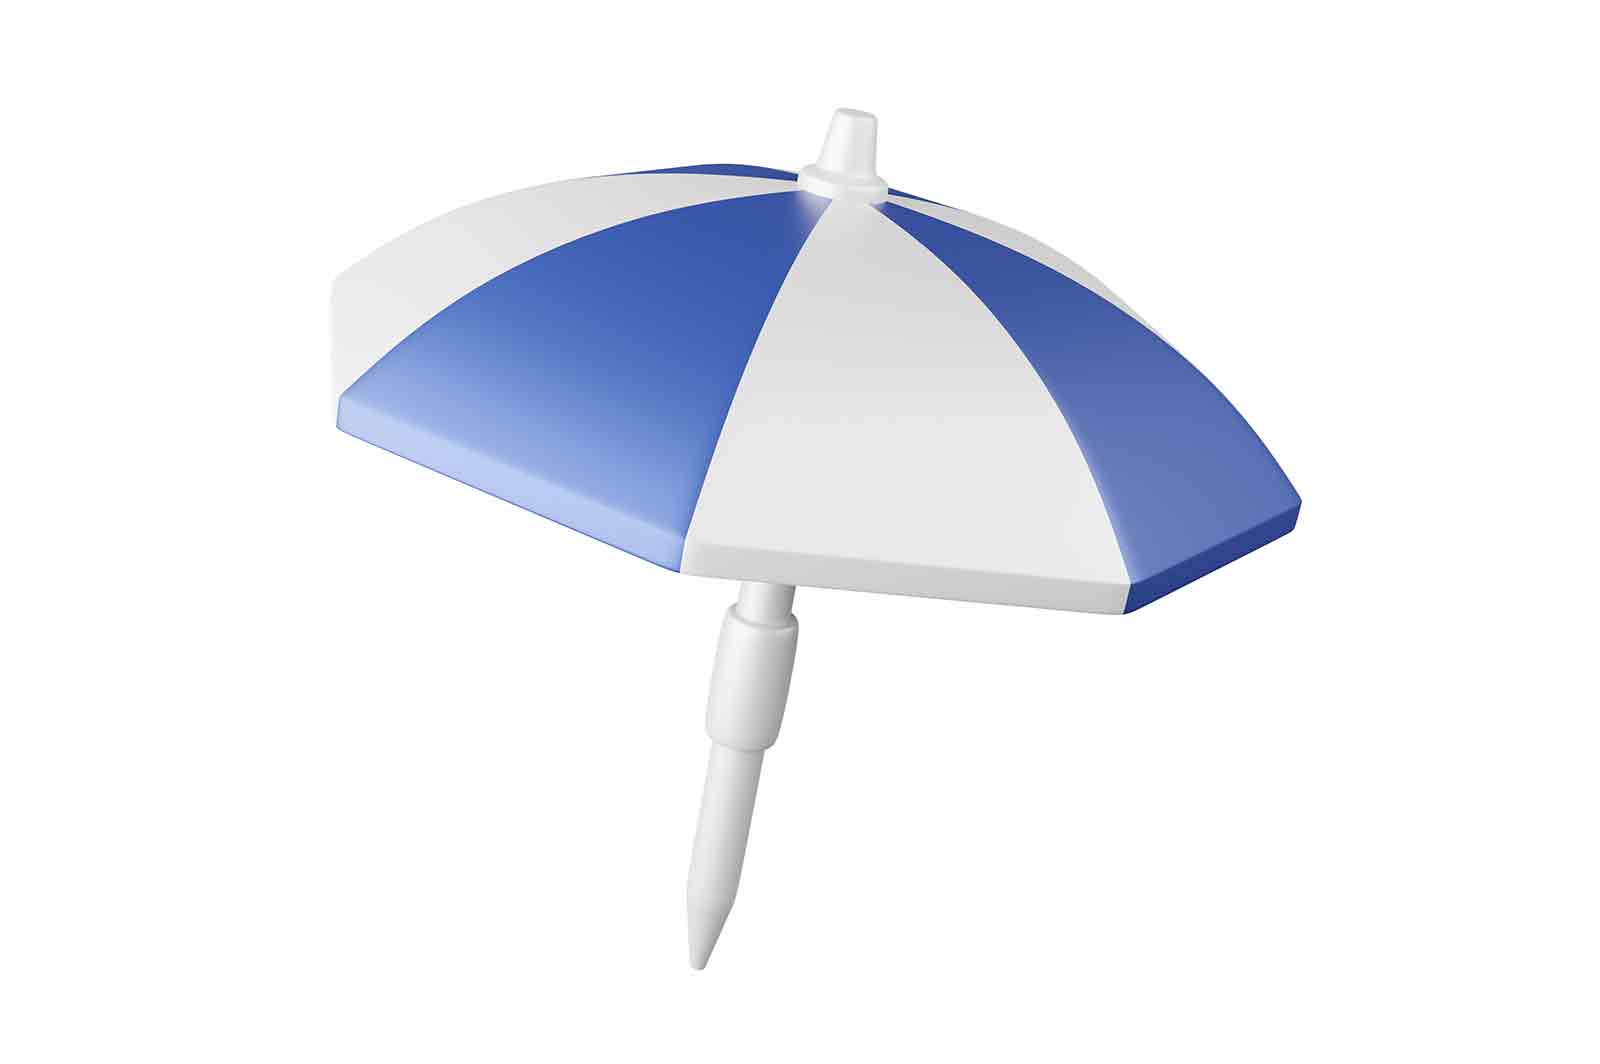 Beach holiday sun protection umbrella 3d rendered icon illustration. Colourful summer parasol, protective device against sun